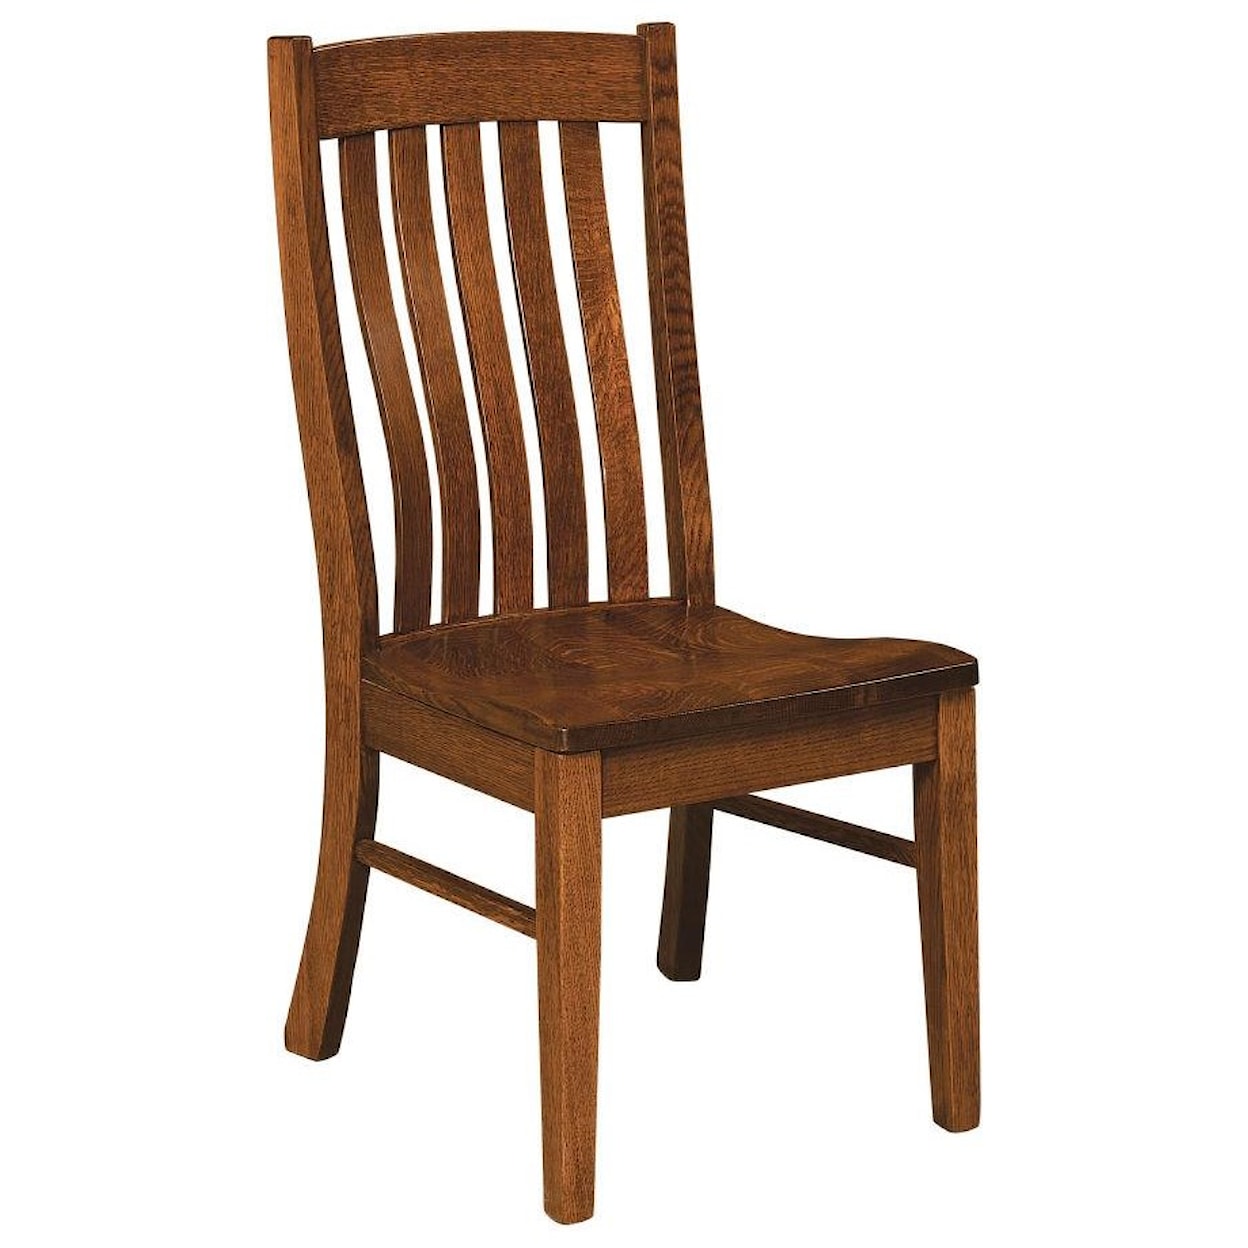 F&N Woodworking Houghton Side Chair